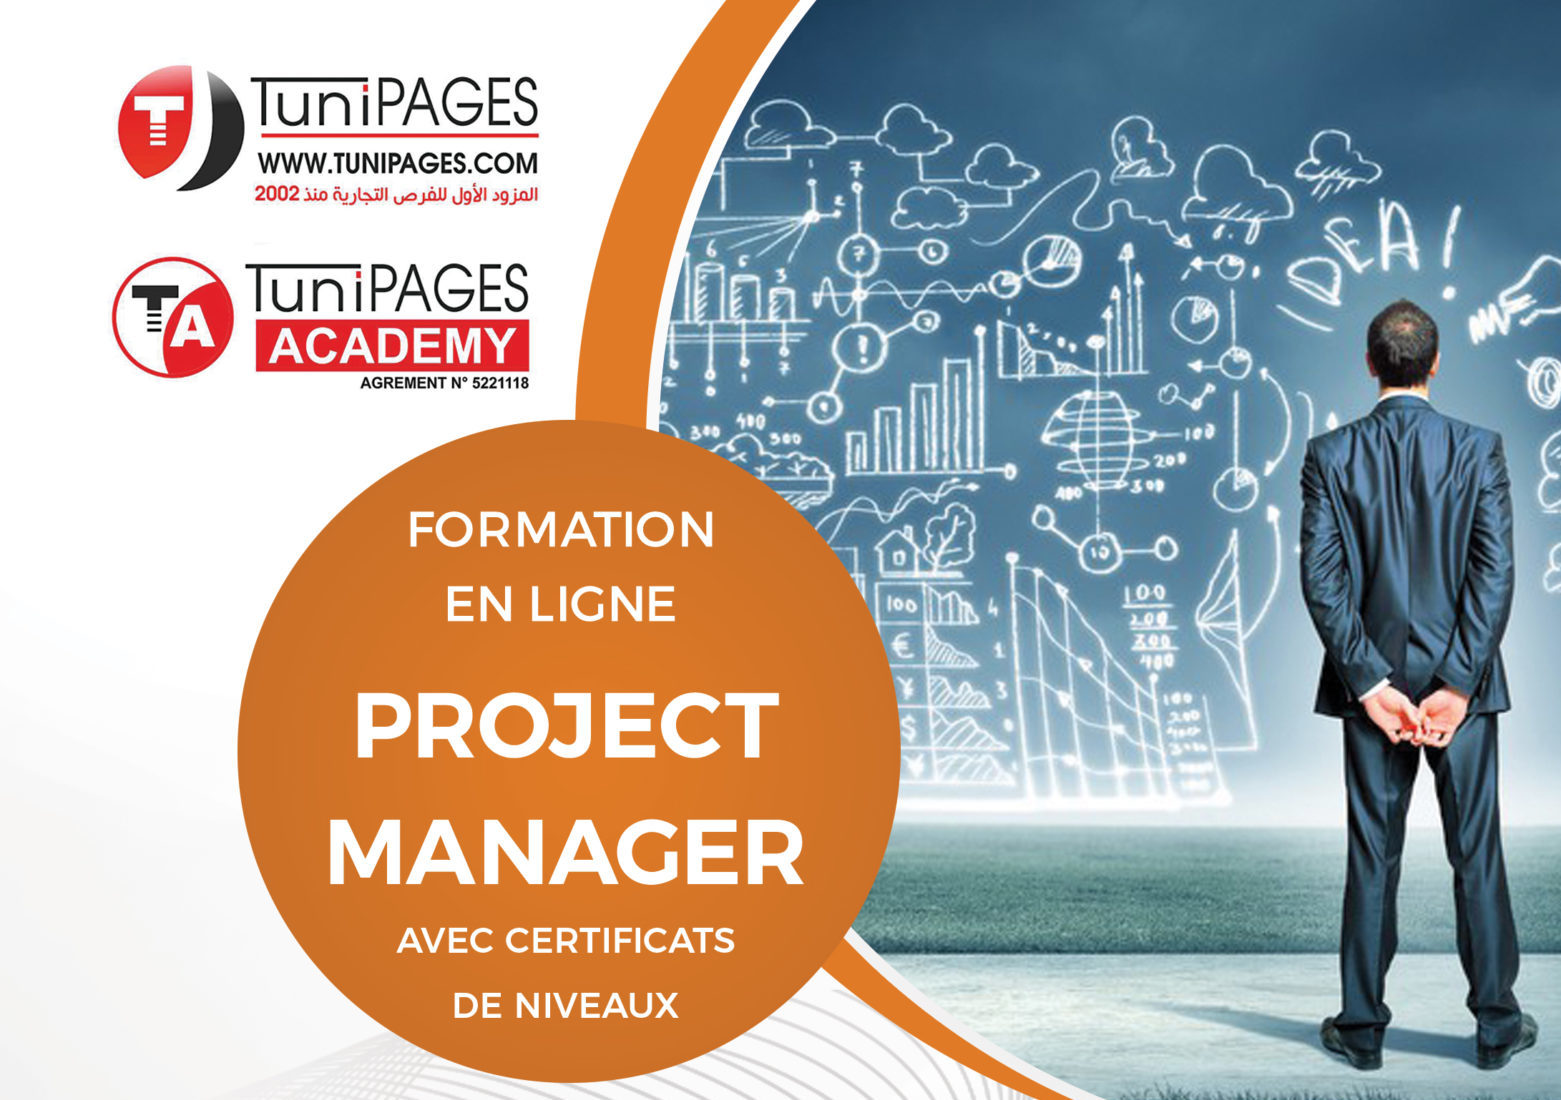 Formation à Monastir  Project Manager  Tunipages